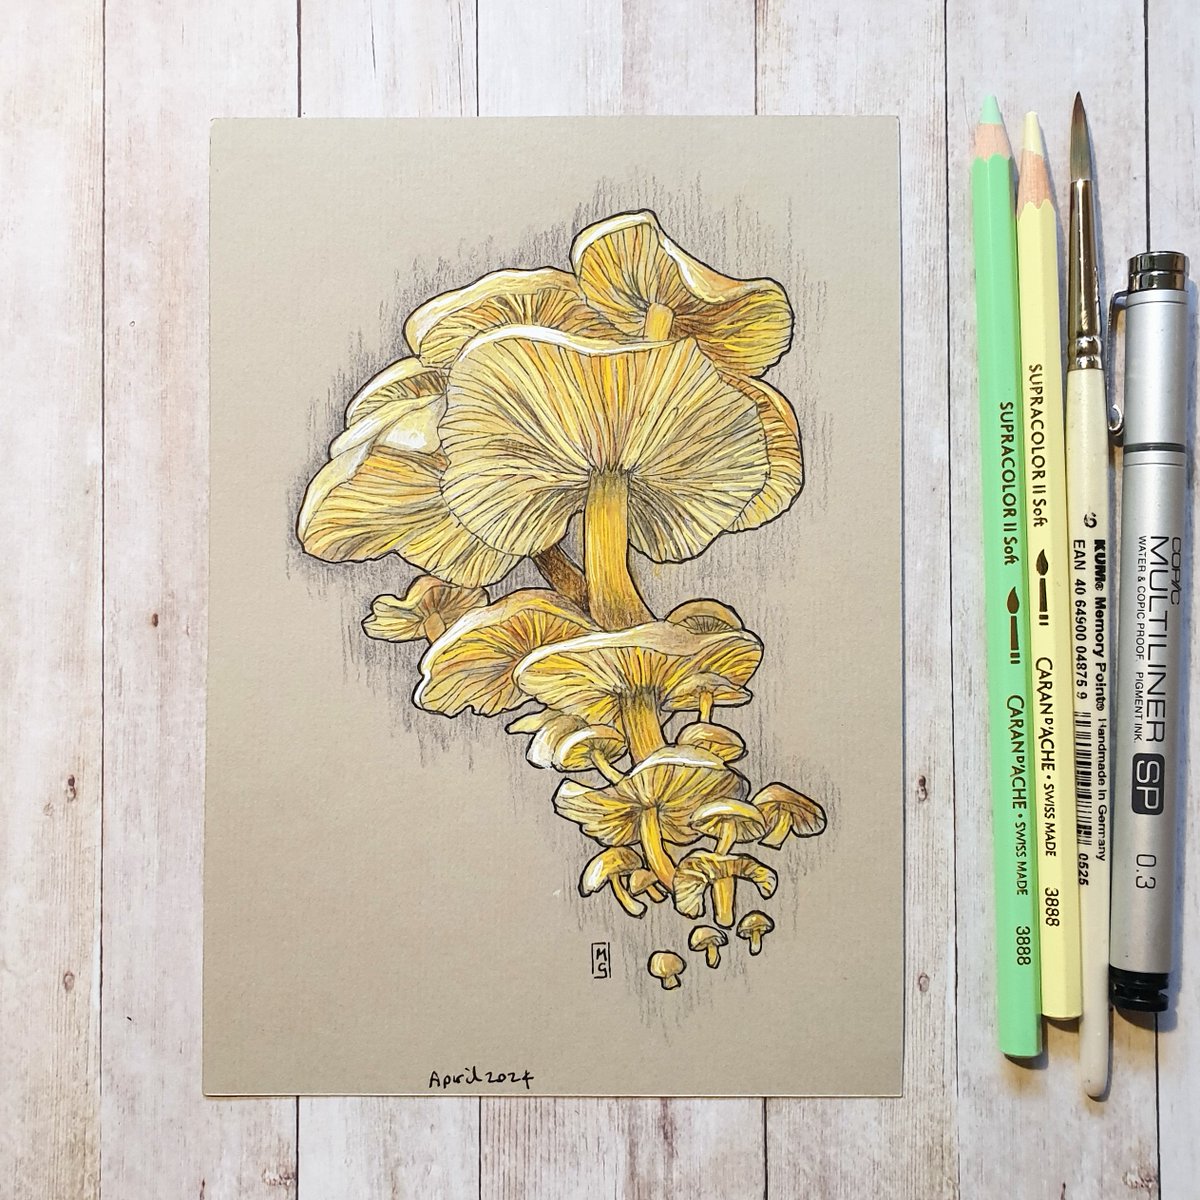 A cluster of yellow mushrooms. I think this is my current favourite of my mushroom drawings, it's available now in my Etsy shop... theweeowlart.etsy.com/listing/170793… #Mushrooms #MushroomDrawing #OriginalArt #drawing #PenAndInk #ColourPencil #art #TraditionalArt #GiftIdeas #Etsy